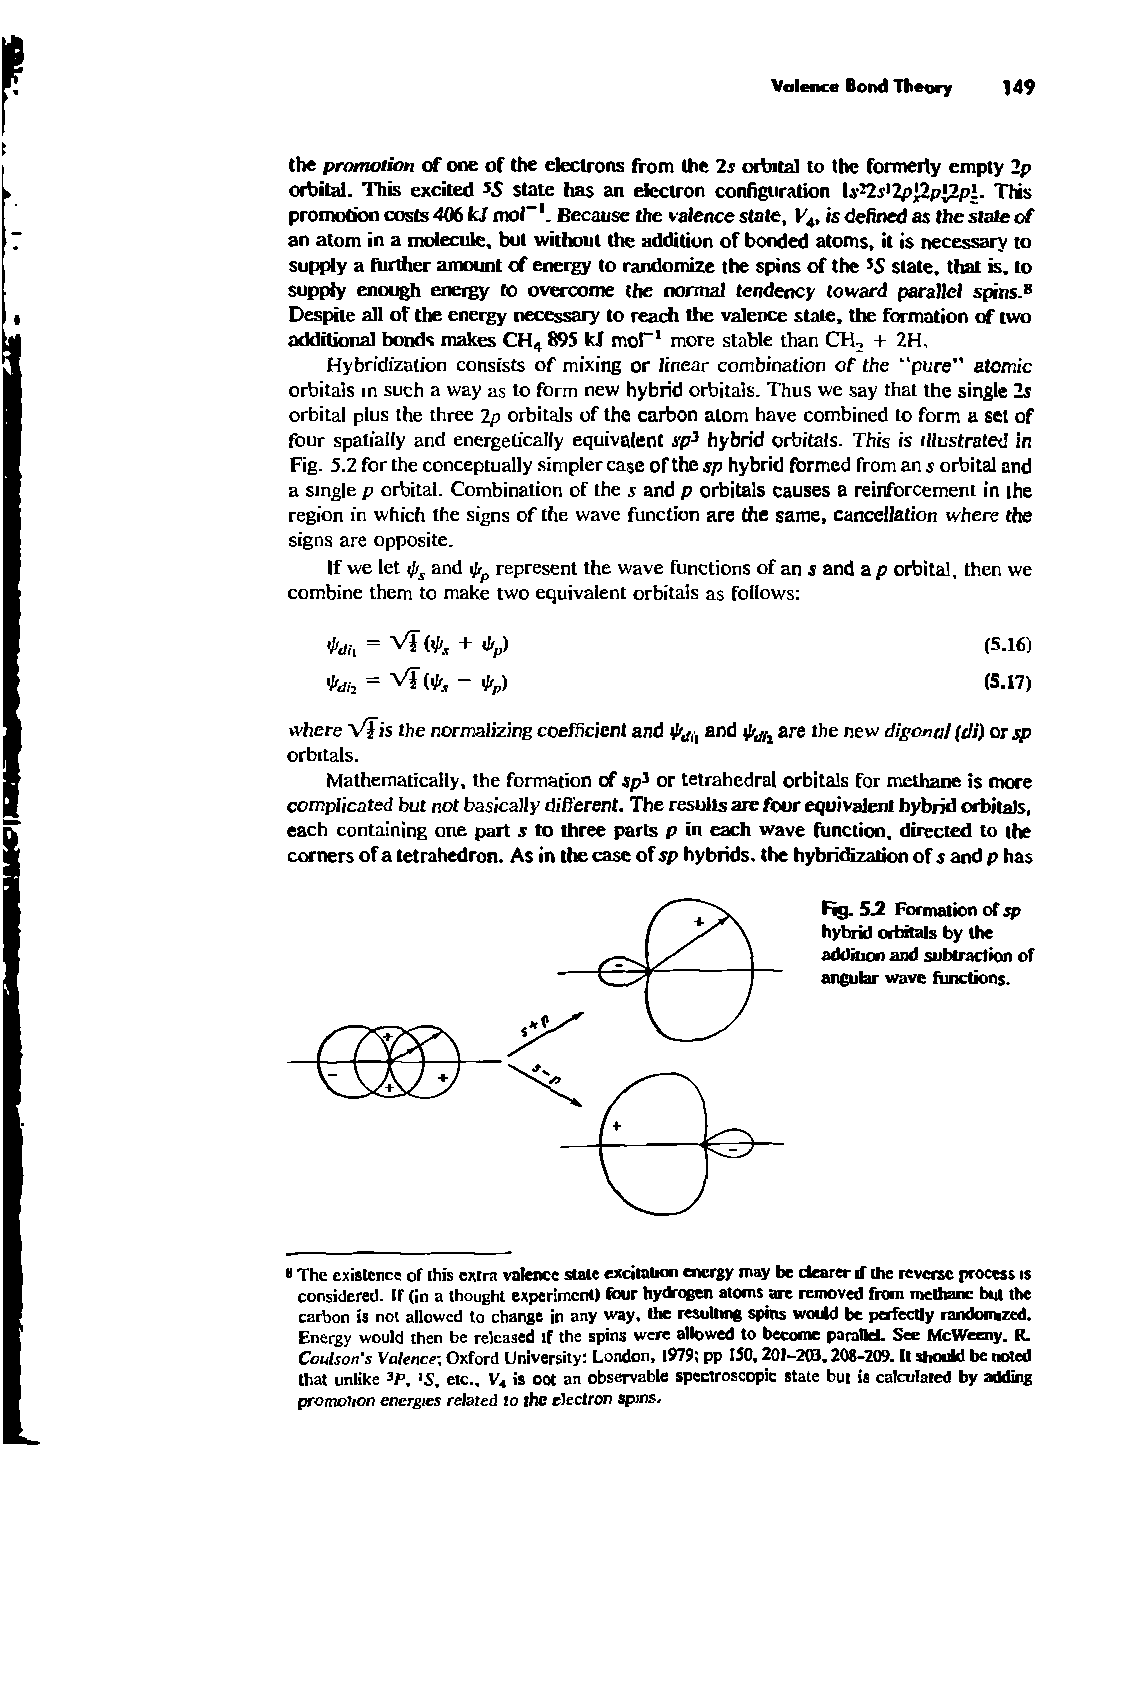 Fig. 5.2 Formation of sp hybrid orbitals by the addition and subtraction of angular wave functions.